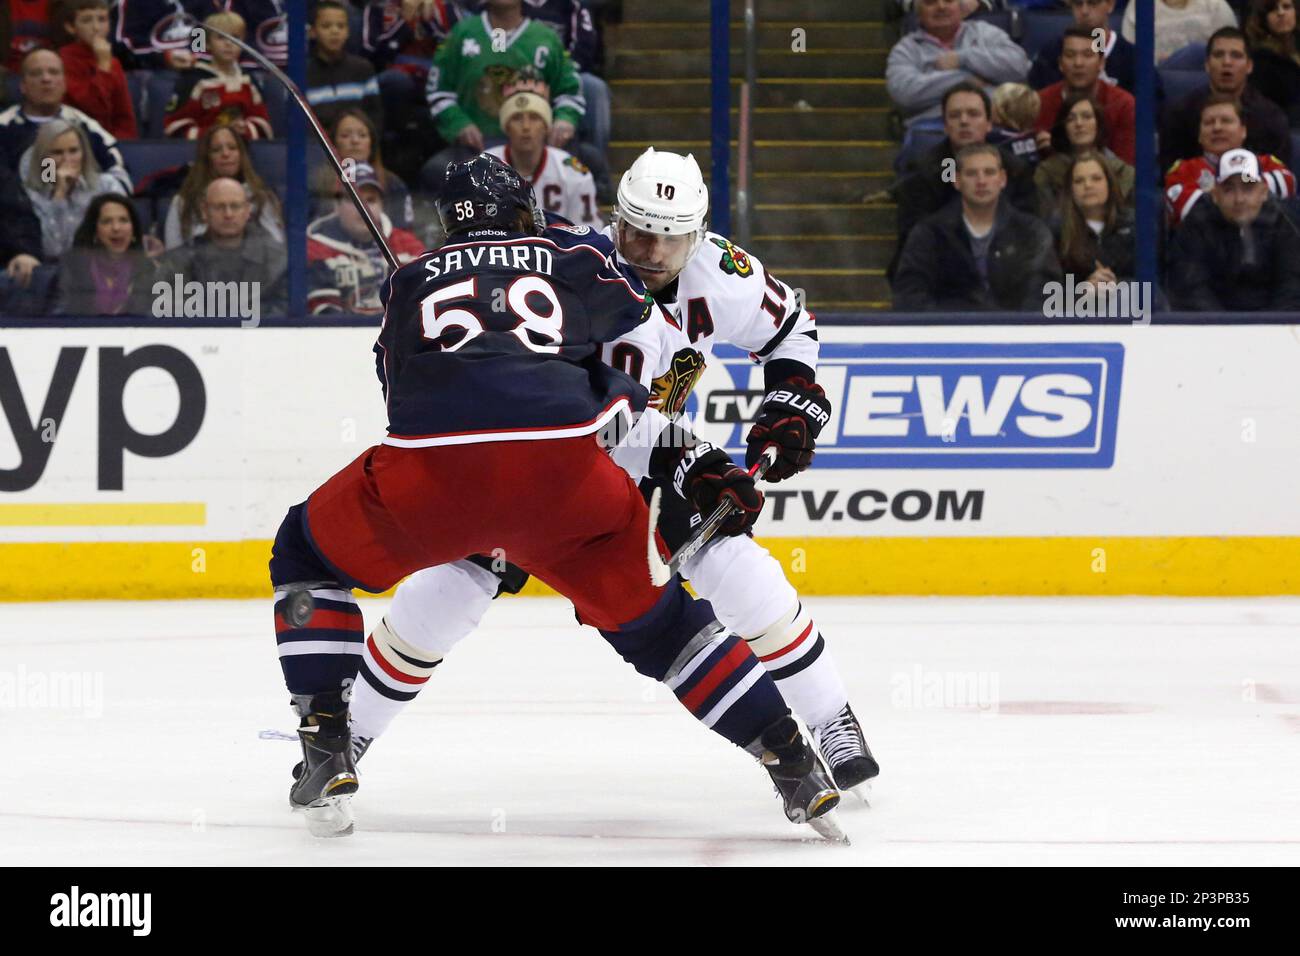 Dec 20, 2014; Columbus Blue Jackets defenseman David Savard (58) checks Chicago Blackhawks left wing Patrick Sharp (10) off the puck in the overtime period during the NHL game between the Chicago